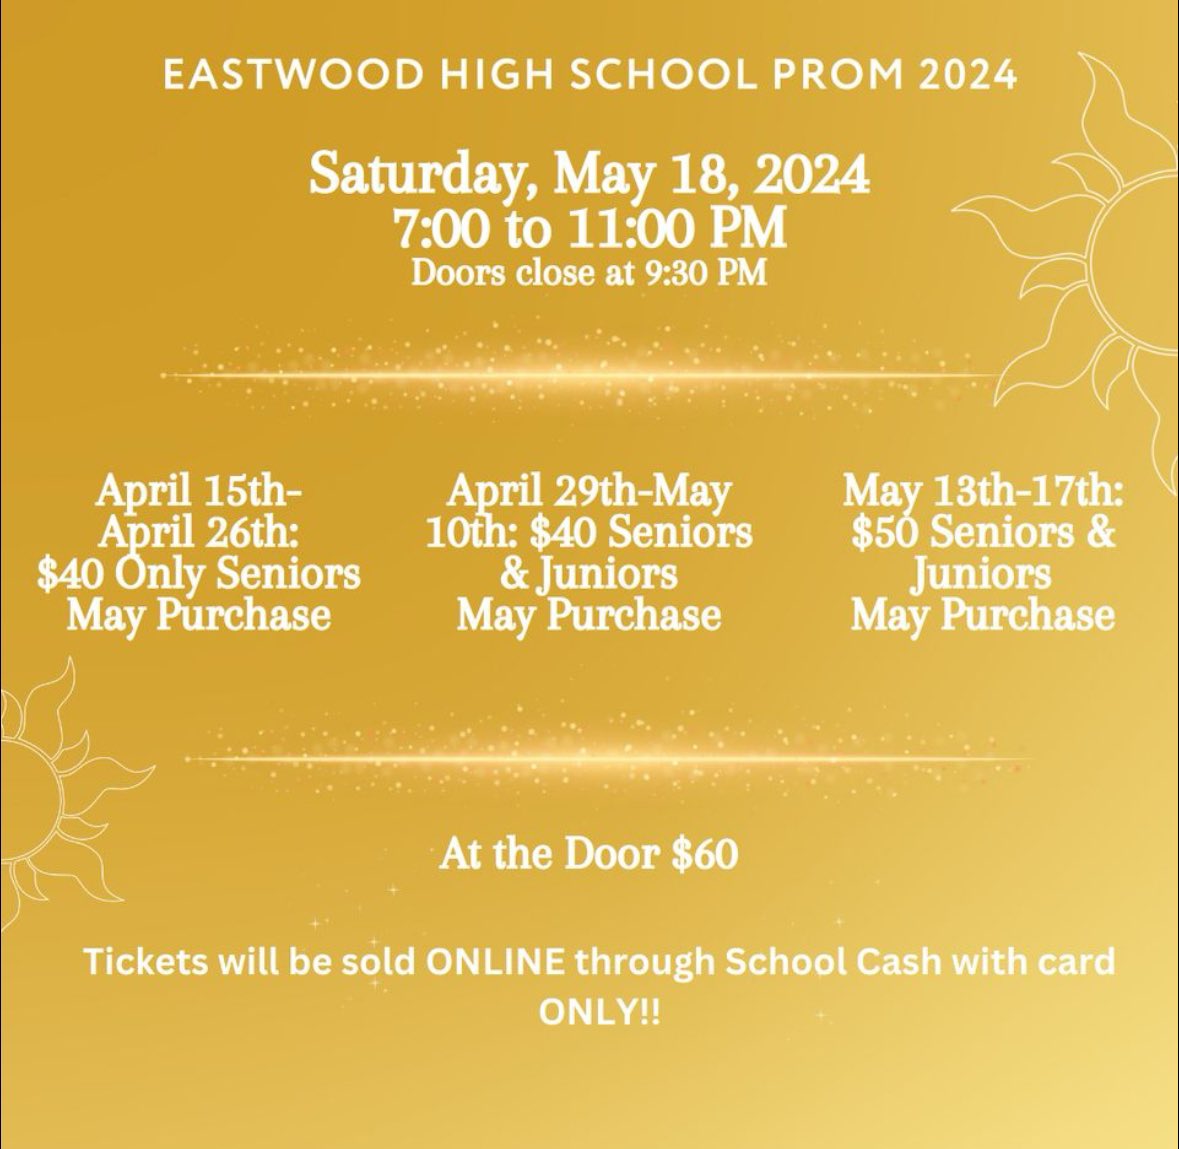 Troopers, scan the QR code or open the link to create an account now so you can purchase prom tickets in the future! 💛 Prom tickets will be available for: Seniors - April 15th Juniors - April 29th schoolcashonline.com @EastwoodHQ @Btorres_EHS @IgarzaTheTeach